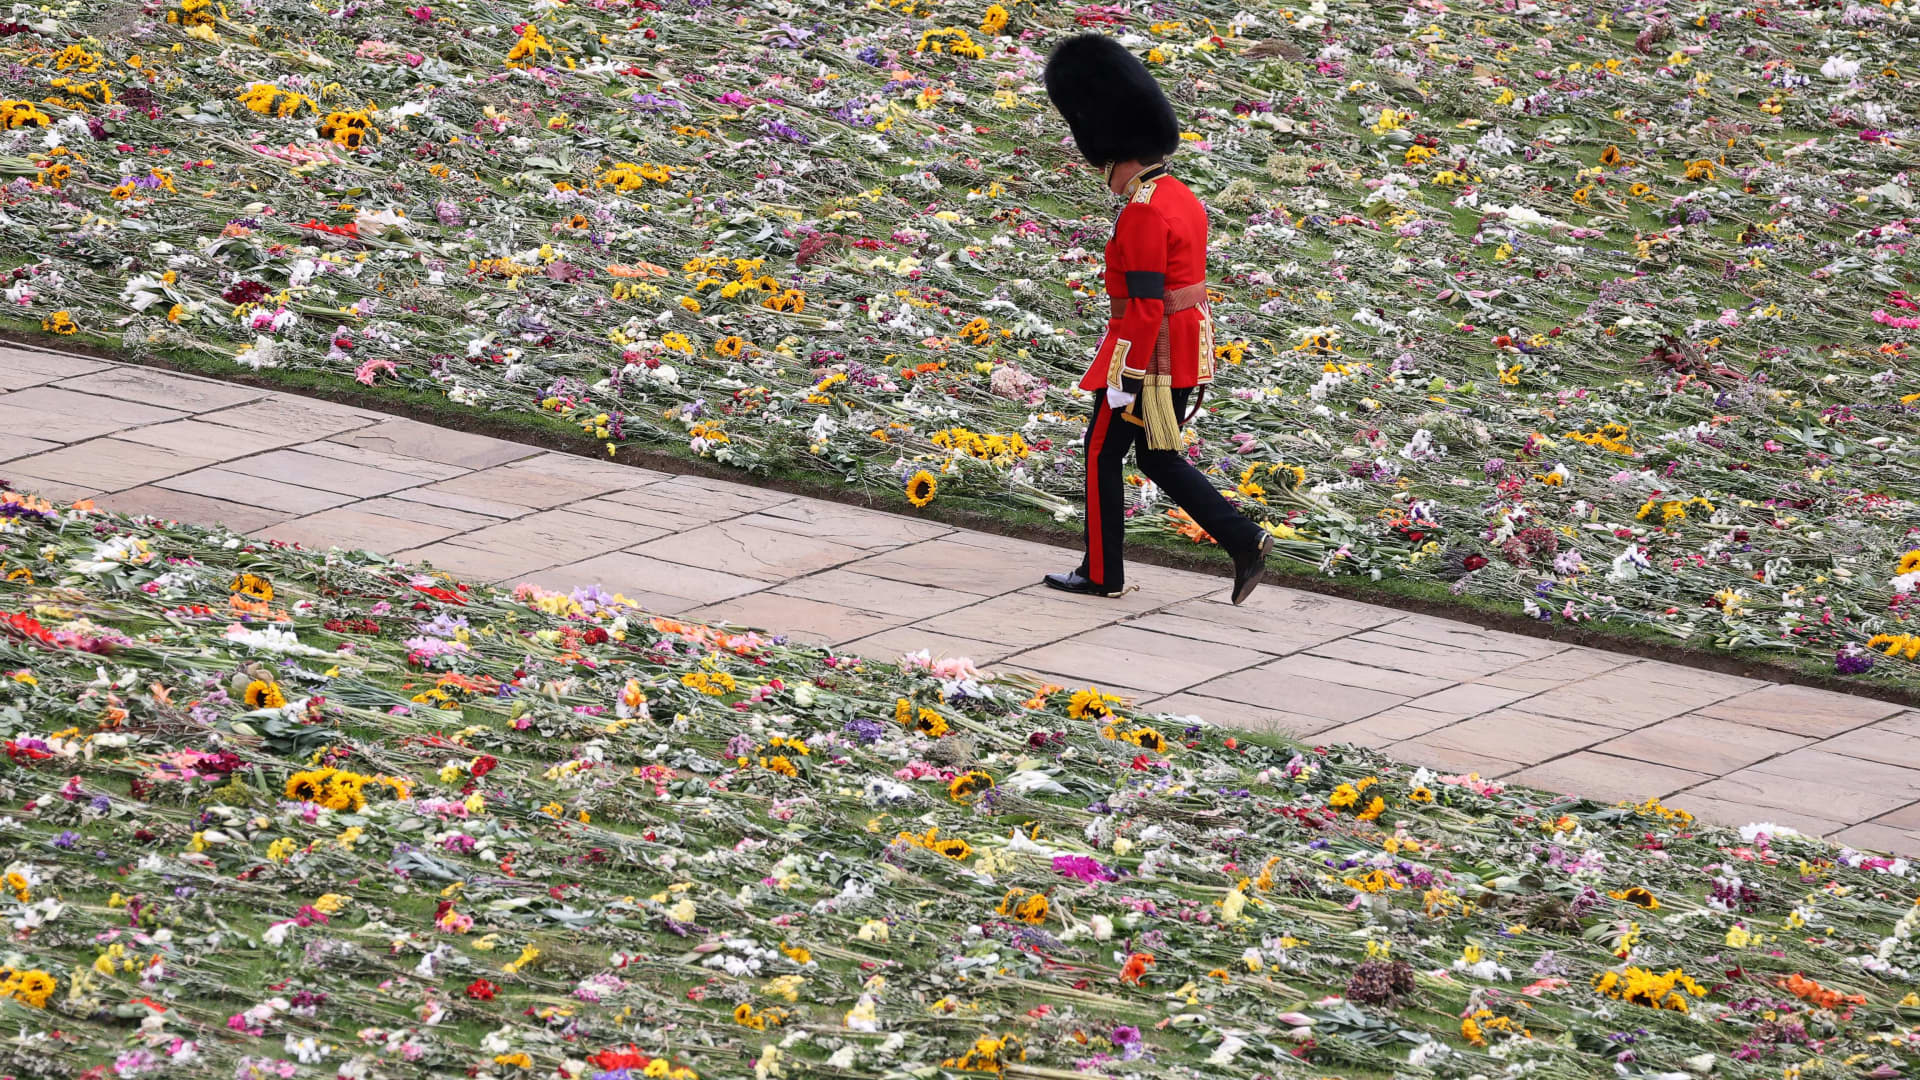 A King's Guard soldier walks along the lawn covered with flowers at the Windsor Castle on September 19, 2022 in Windsor, England on the day of the state funeral for Queen Elizabeth II.